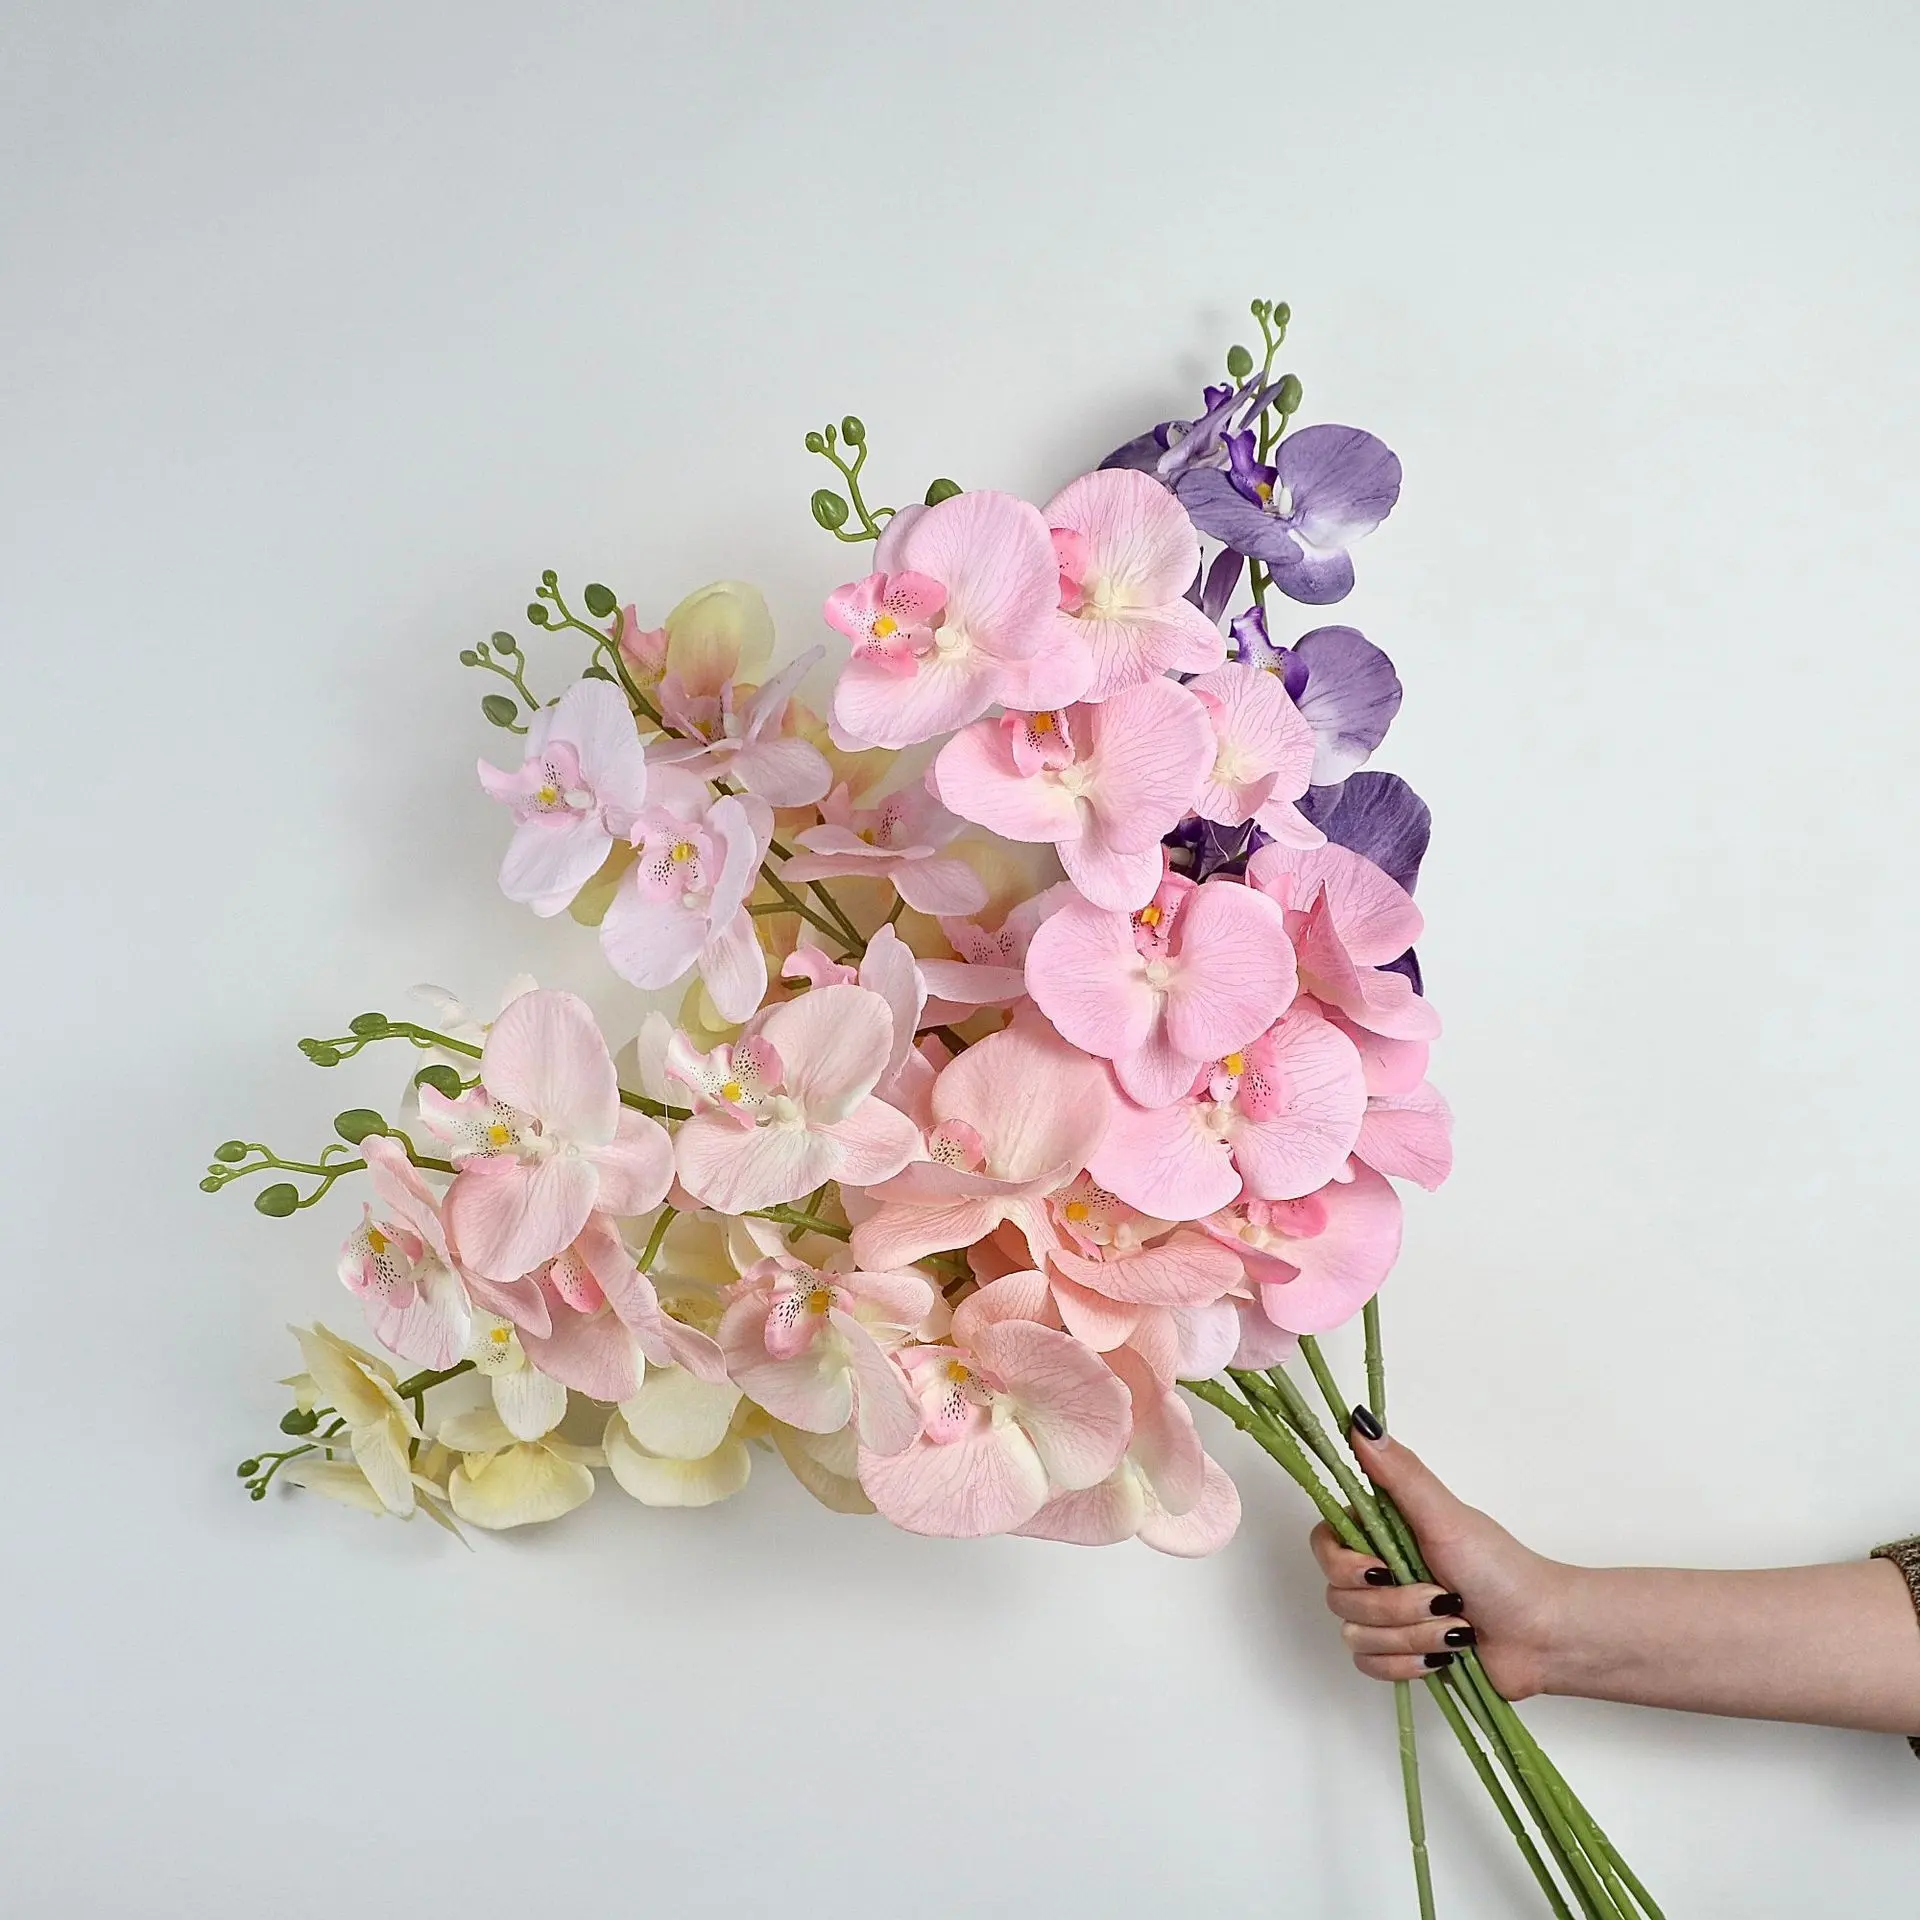 Wholesale Quality 9 Heads Large Artificial Phalaenopsis Butterfly Orchid Real Touch Orchids Latex Decorative Flower